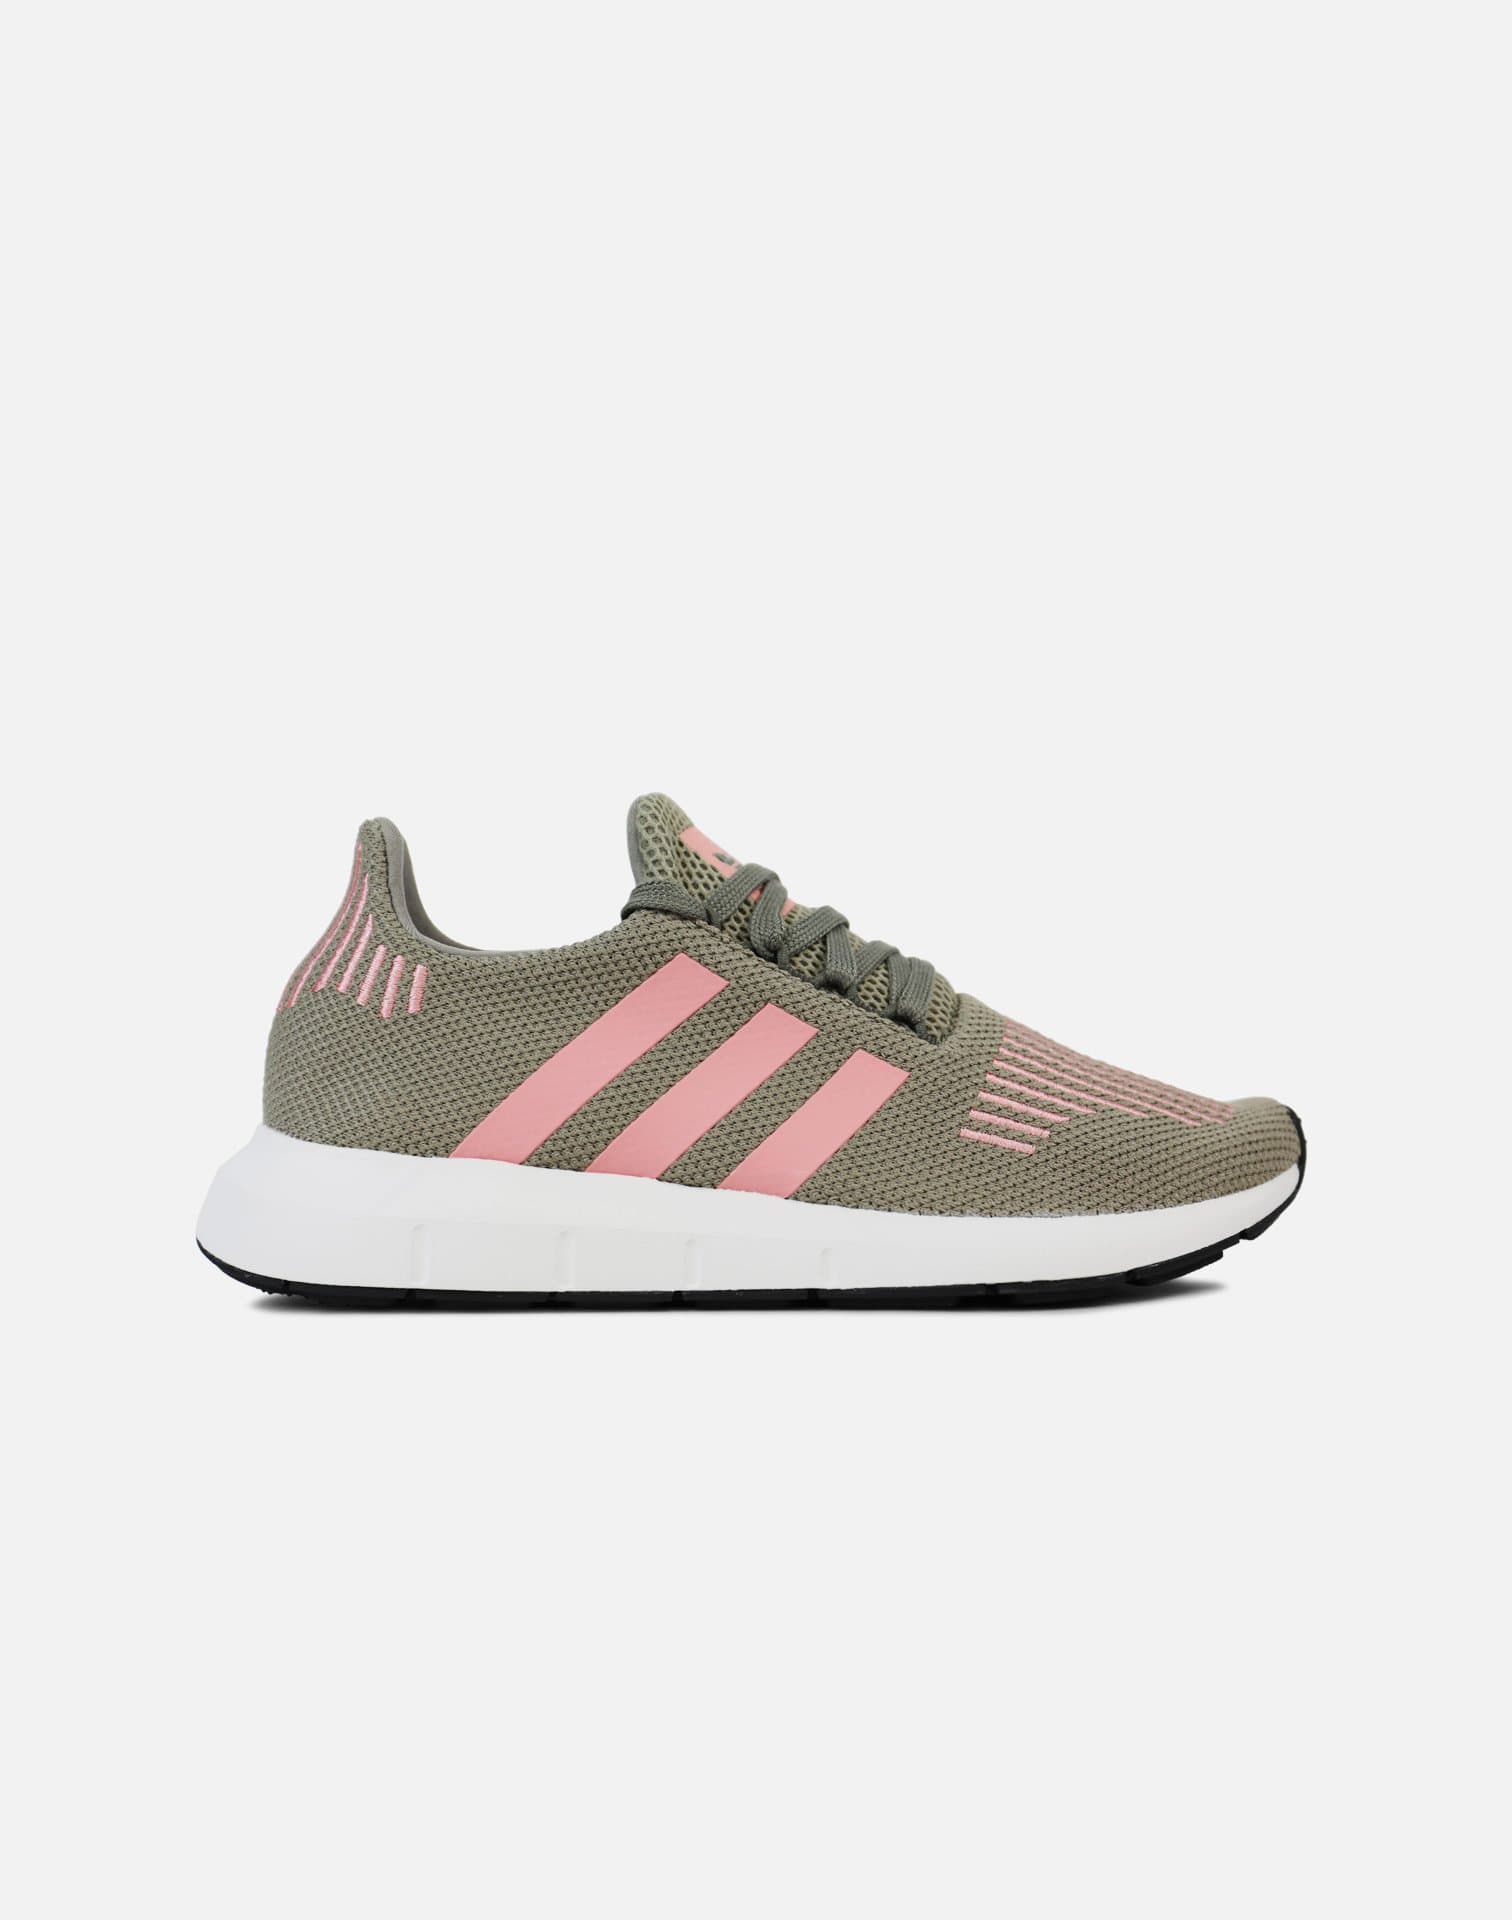 adidas Swift Run (Trace Cargo/Trace Pink-Crystal White)